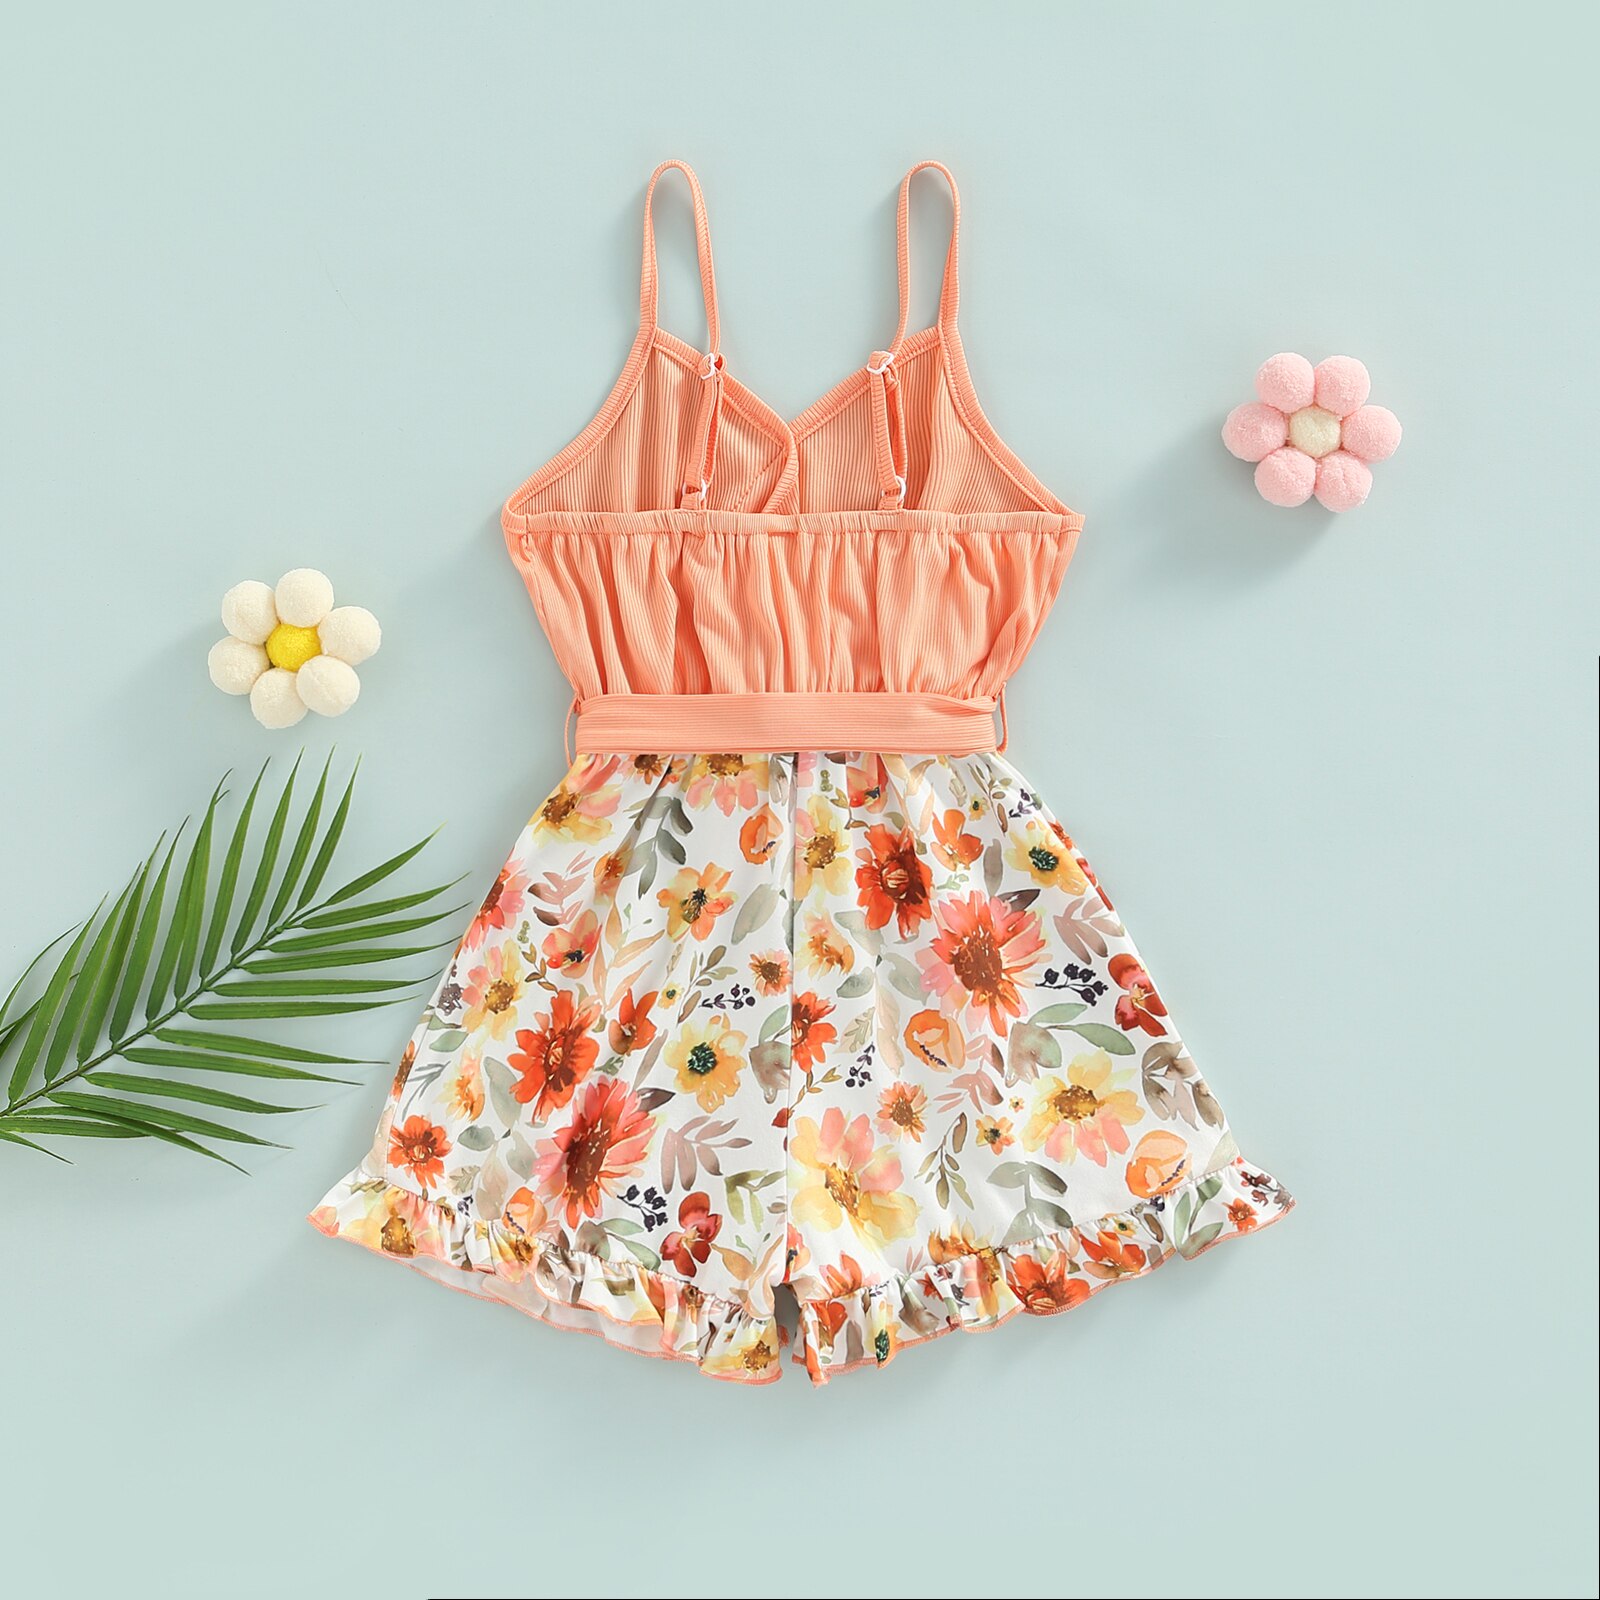 Kid-Baby-Girls-Summer-Short-Romper-Floral-Print-Sleeveless-Ruffled-Wide-Leg-Jumpsuit-Clothes-with-Belt-4